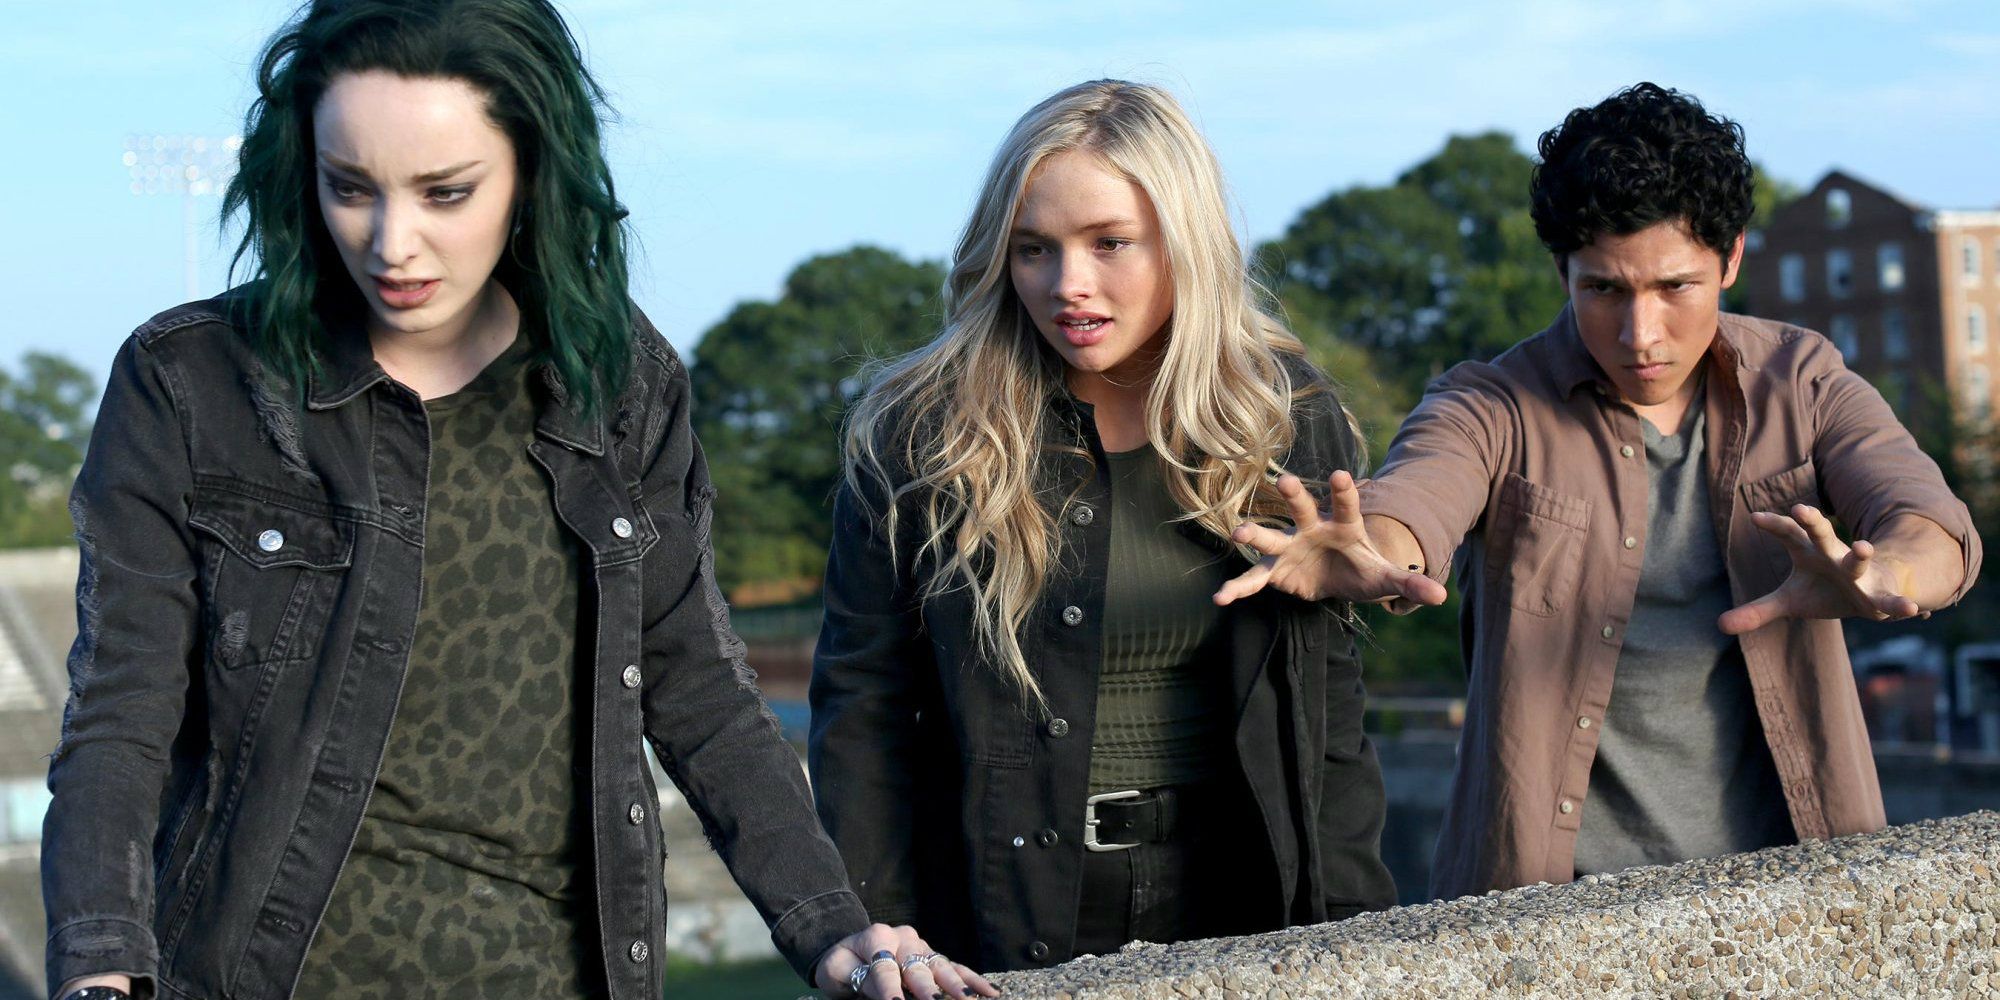 The Gifted Episode 6 cast